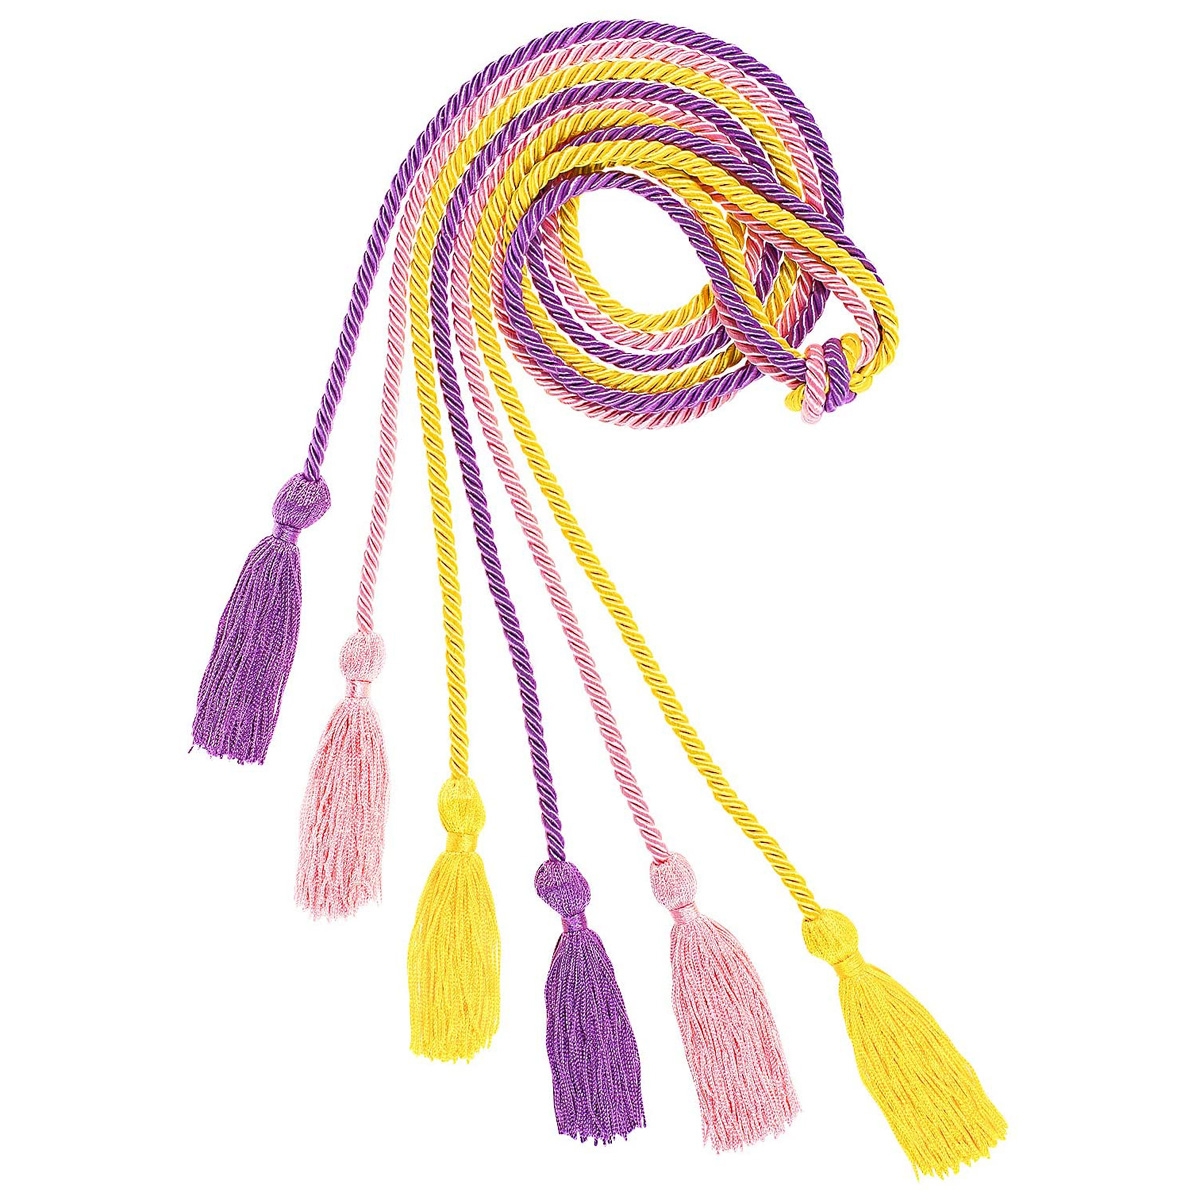 Honor Cords, Rayon Braided Honor Cords with Tassels for Grad Days and Graduates Photography 